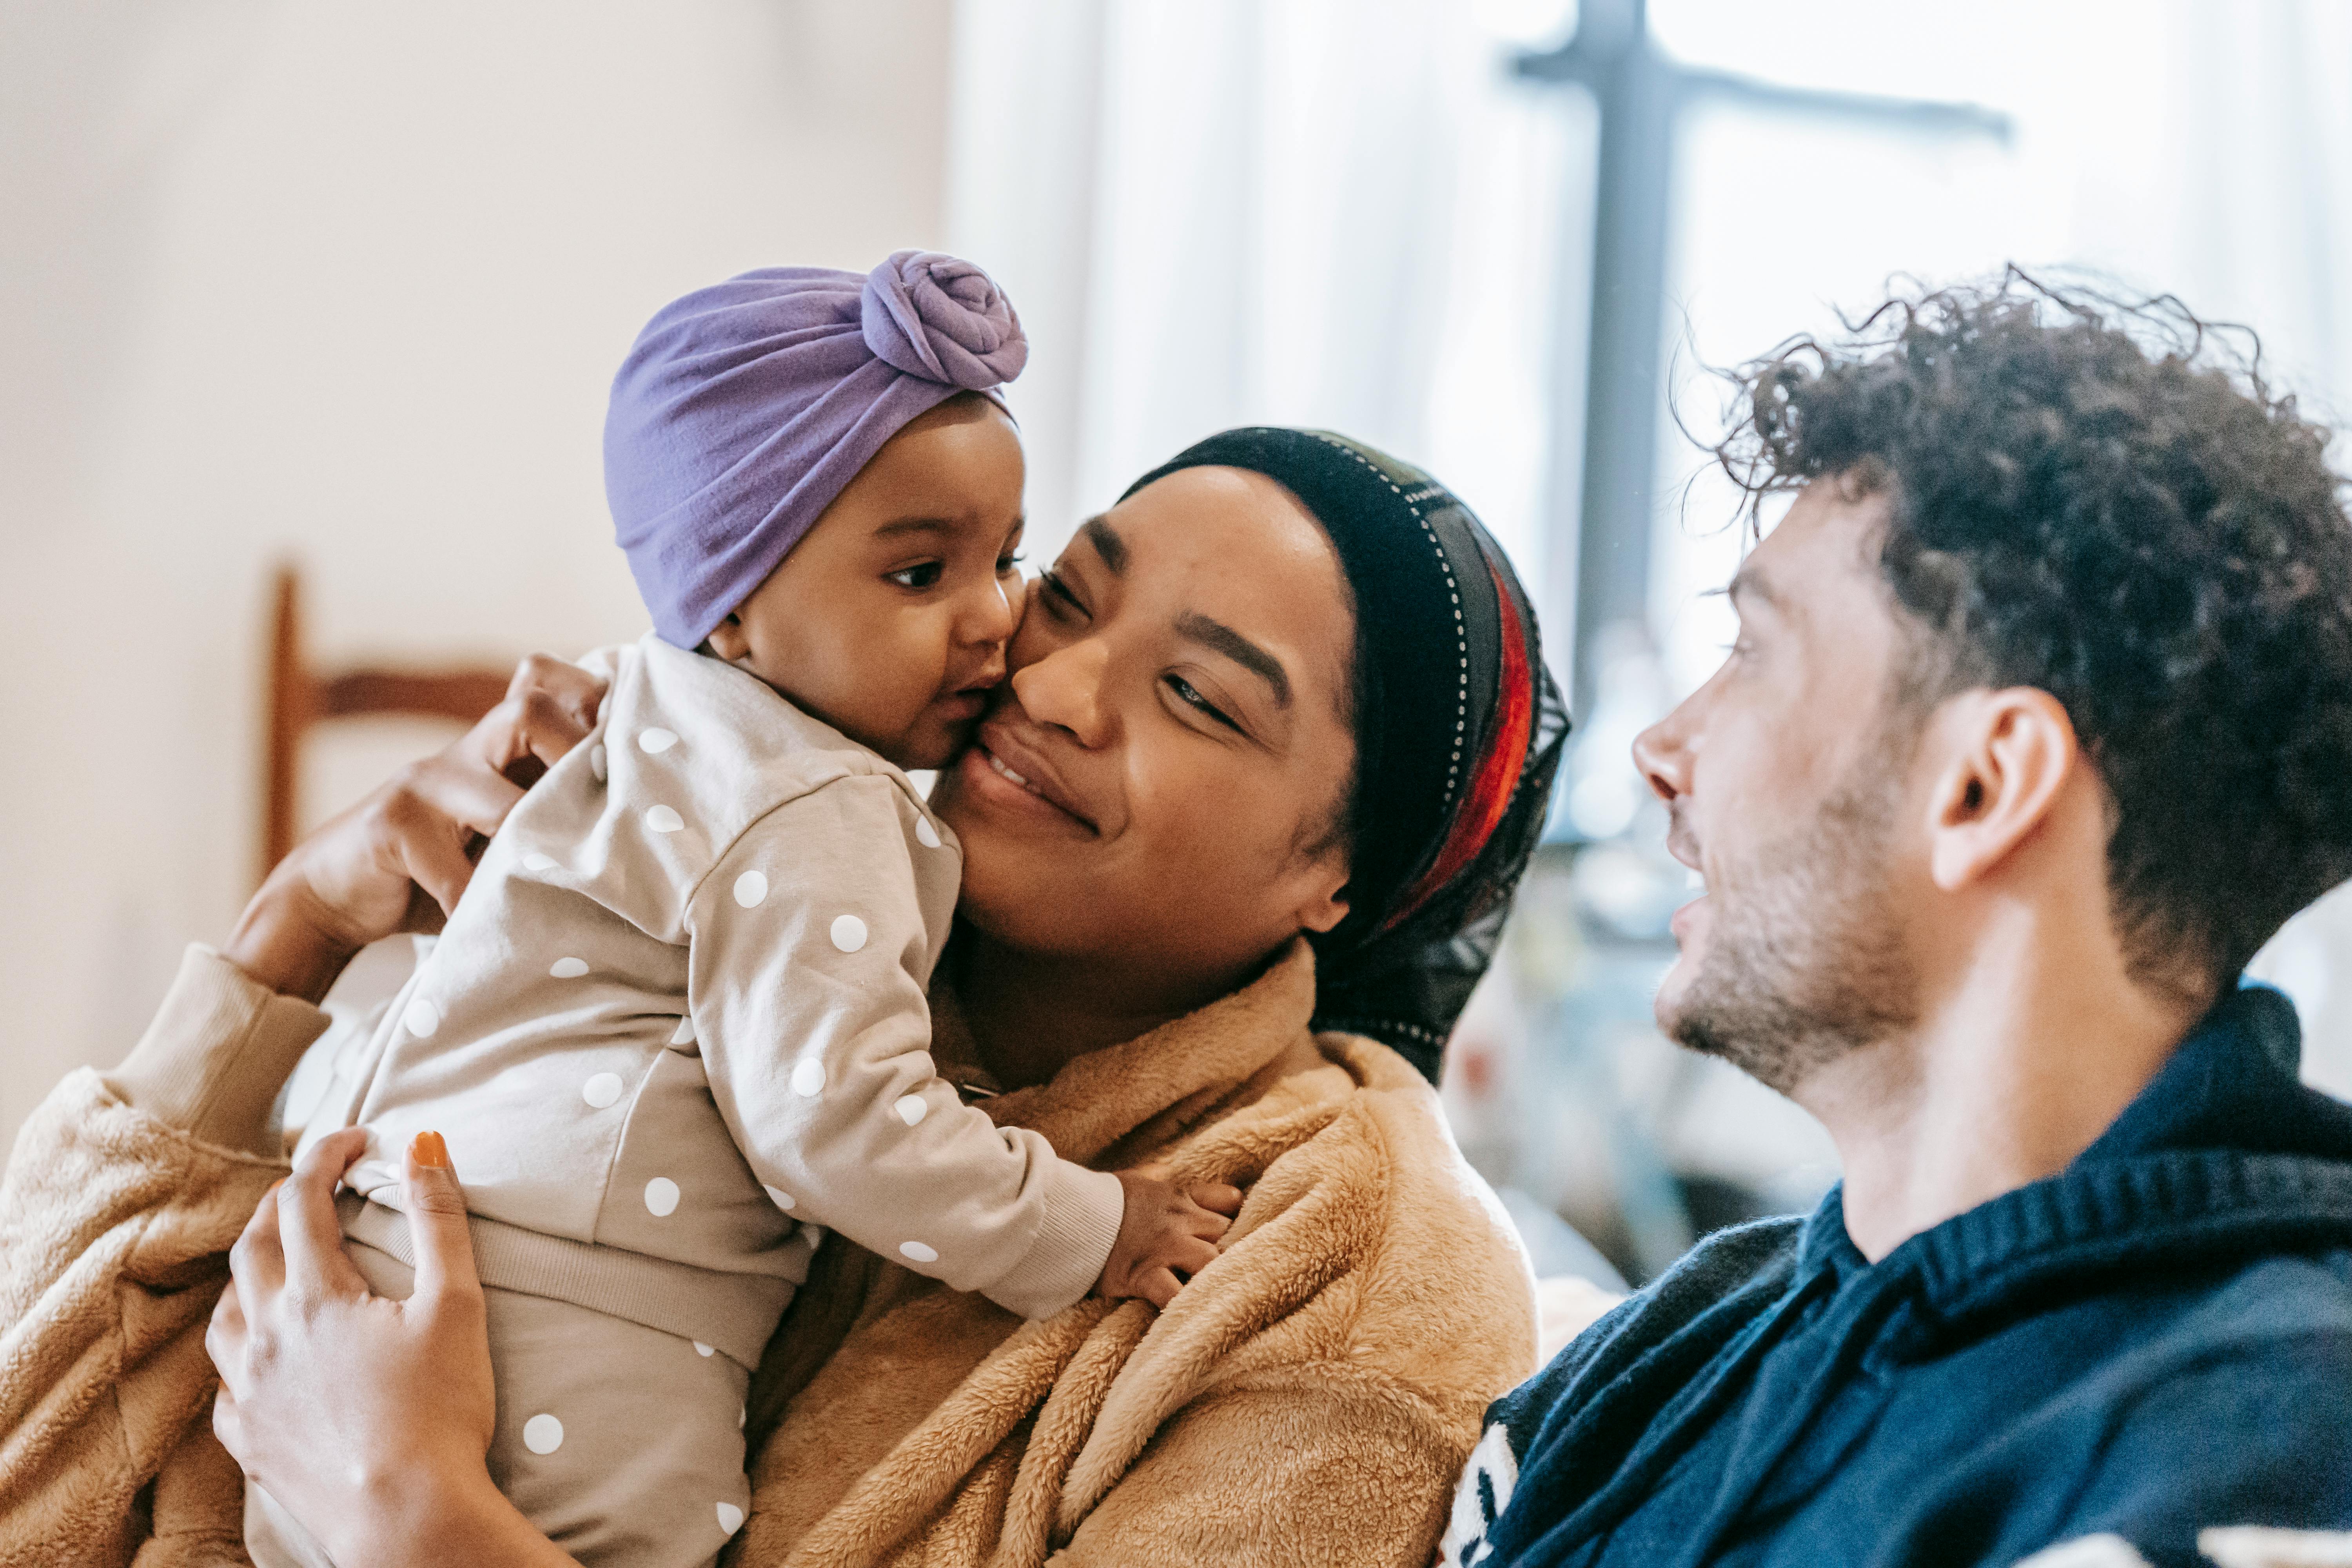 A happy couple bonding with their child | Source: Pexels